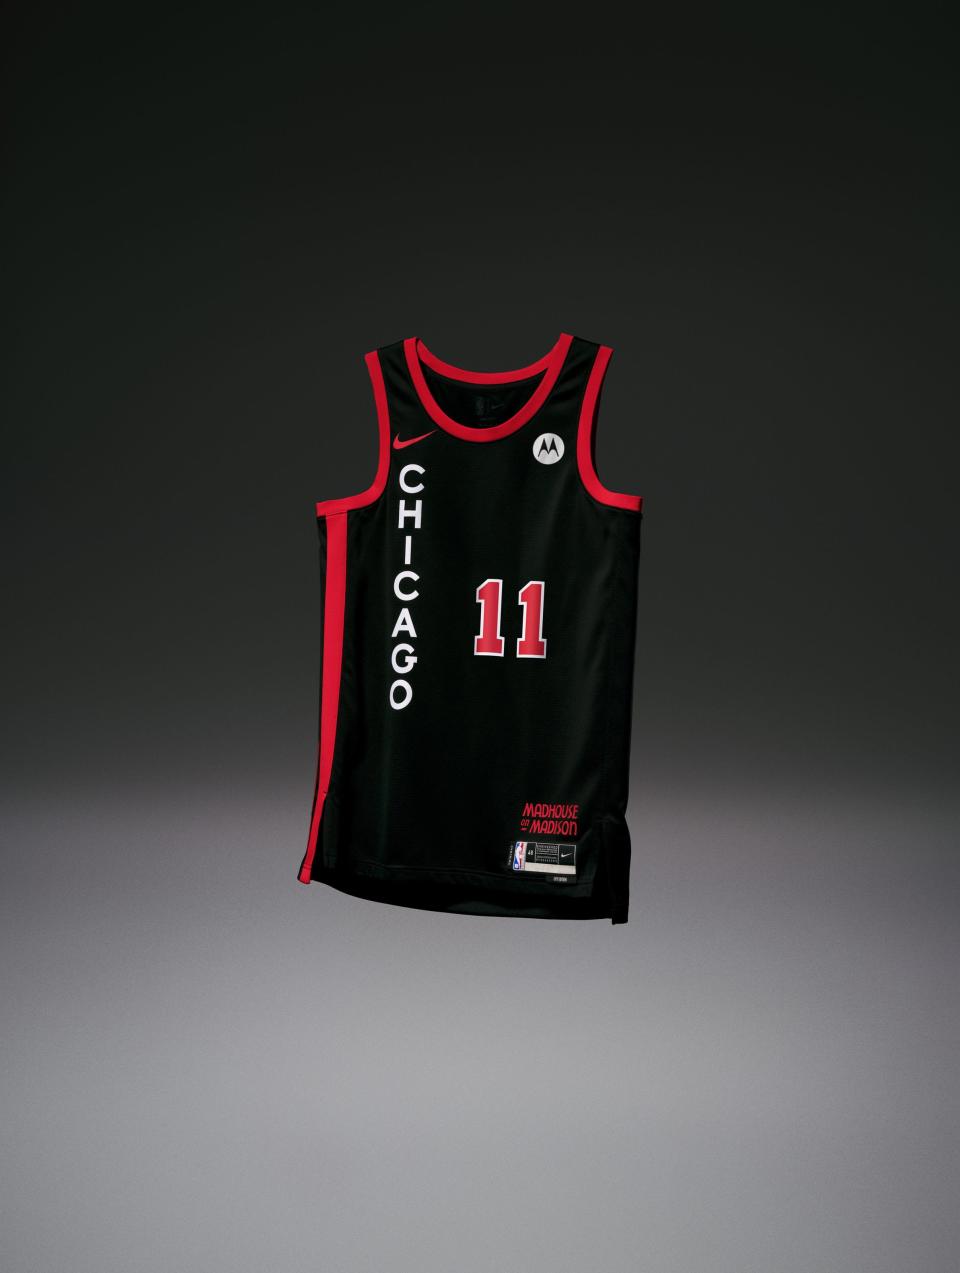 The Chicago Bulls 2023-24 City Edition jersey